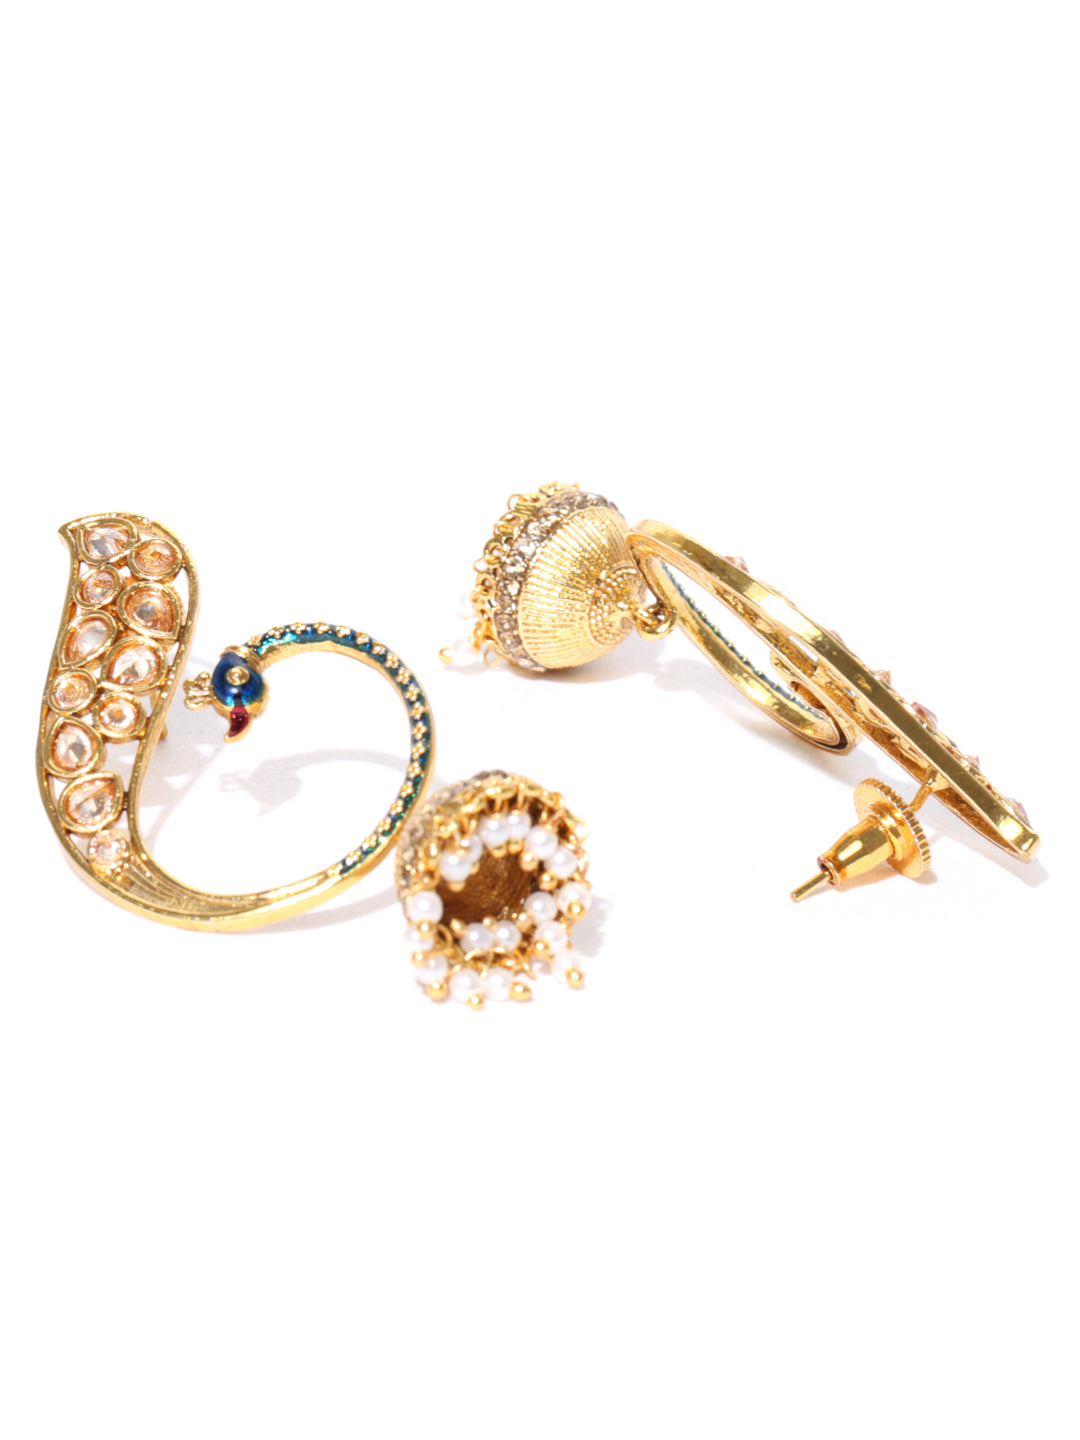 Gold-Plated Stones Studded Peacock Inspired Jhumka Earrings